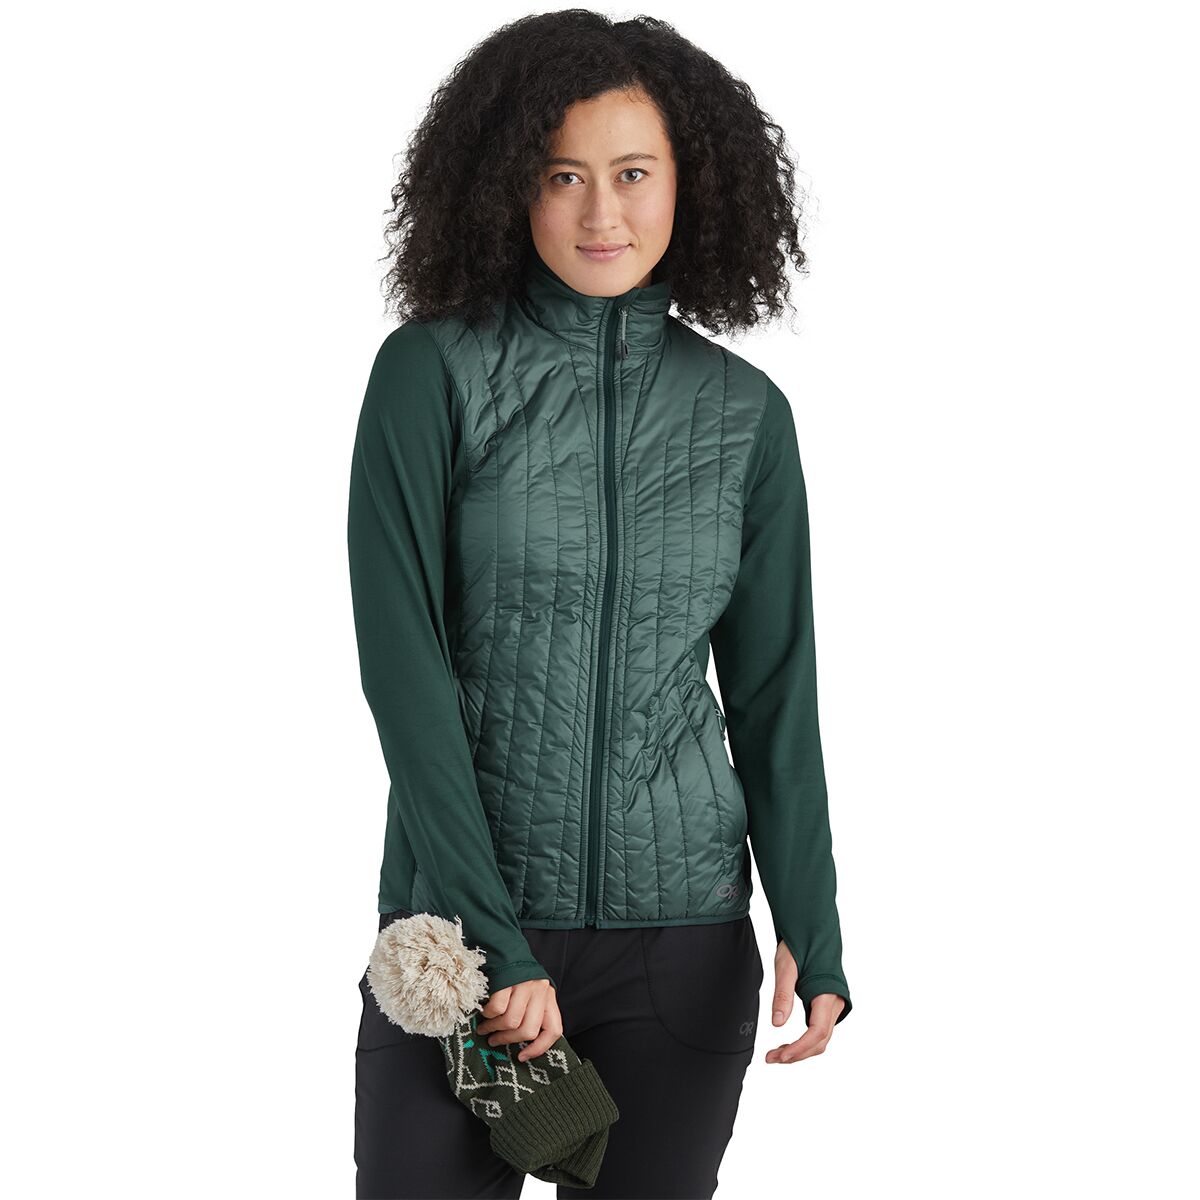 Outdoor Research Melody Hybrid Jacket - Women's